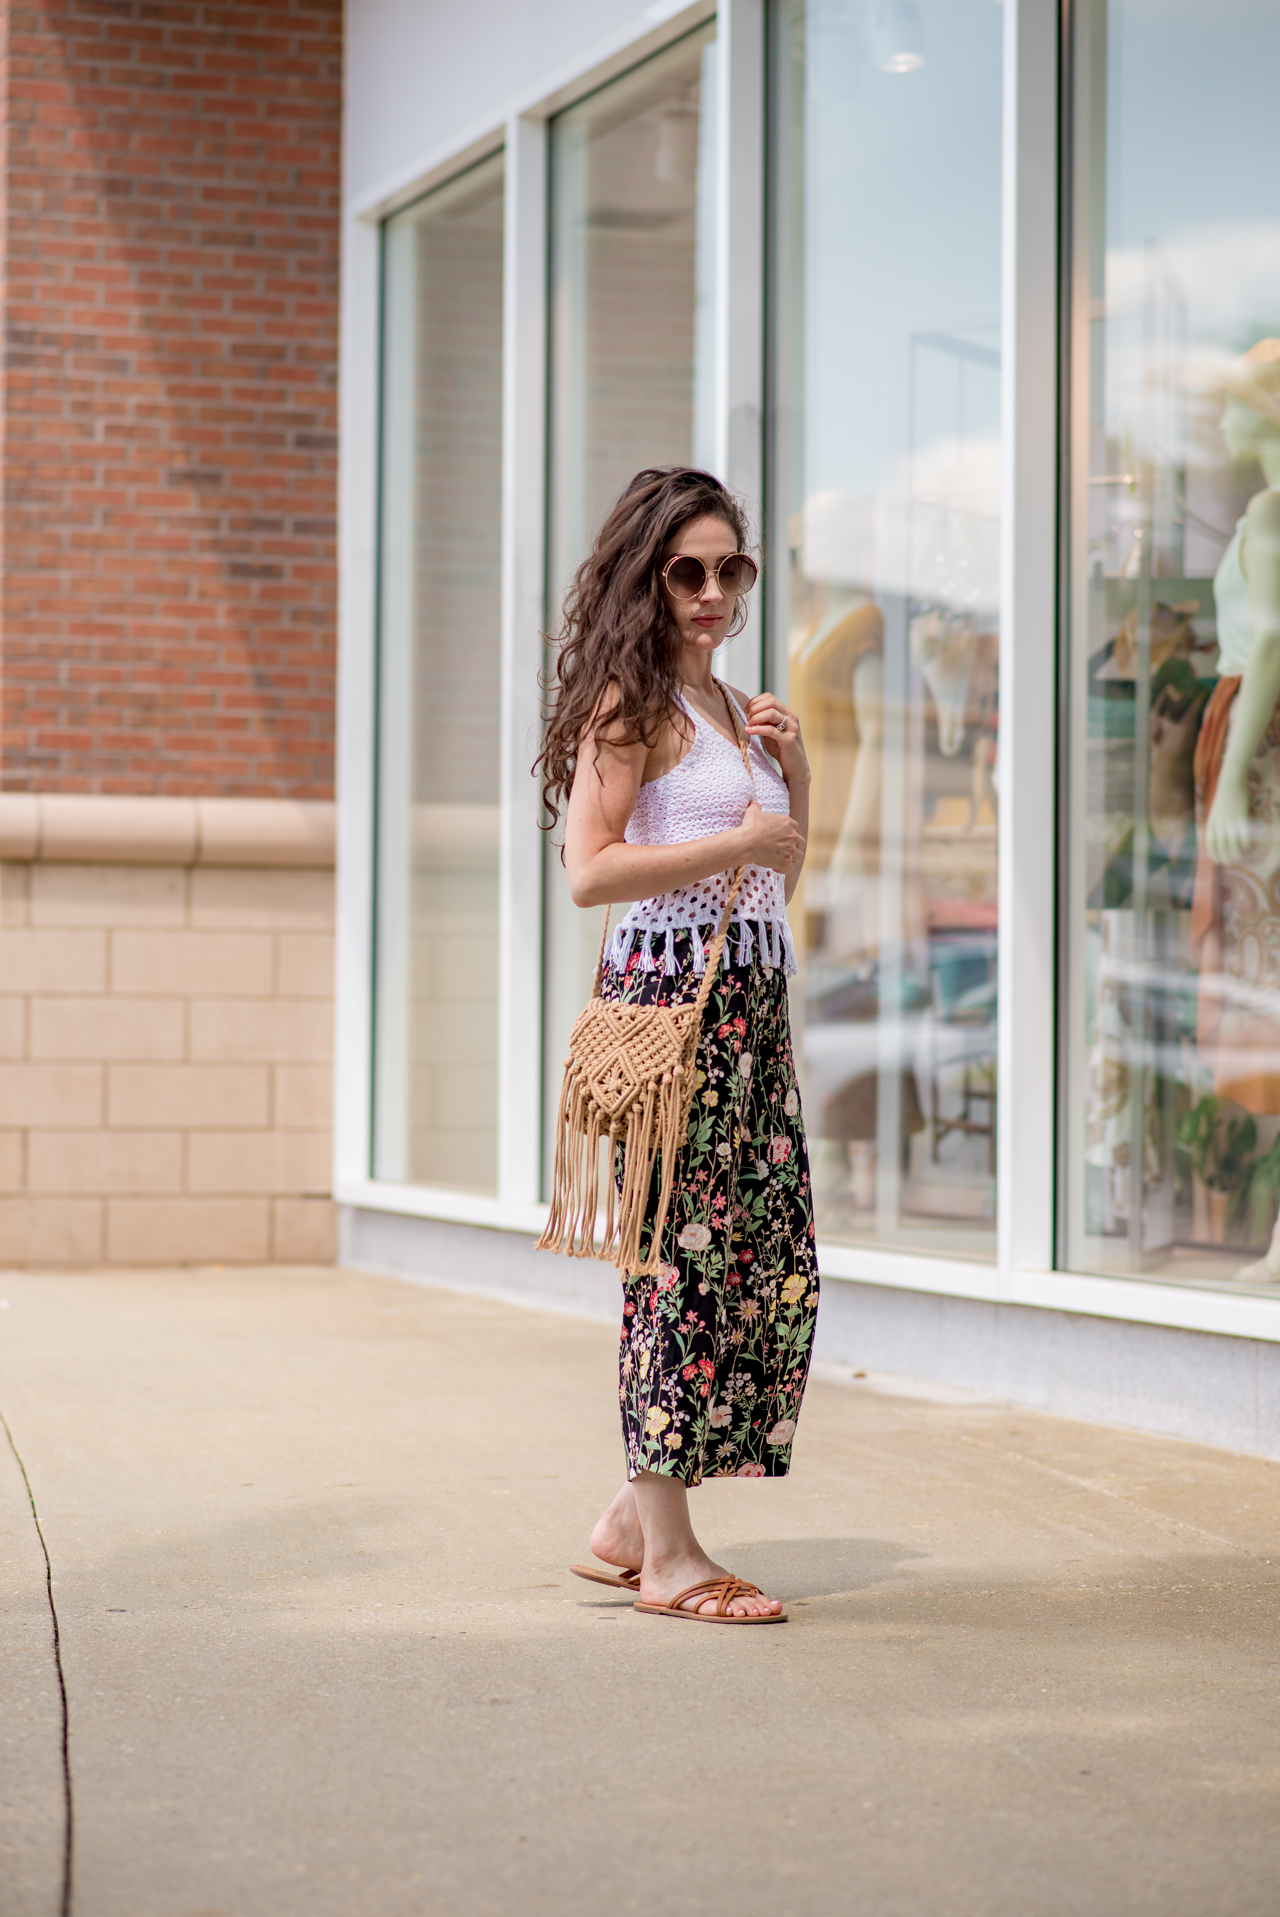 boho style, ootd, outfit of the day, style blogger, atlanta bloggers, atlanta style bloggers, atlanta influencers, loft, floral pants, palazzo pants, blogging, rewardstyle, palazzo pants, fringe top, crochet fringe bag, Erica Valentin, boho style